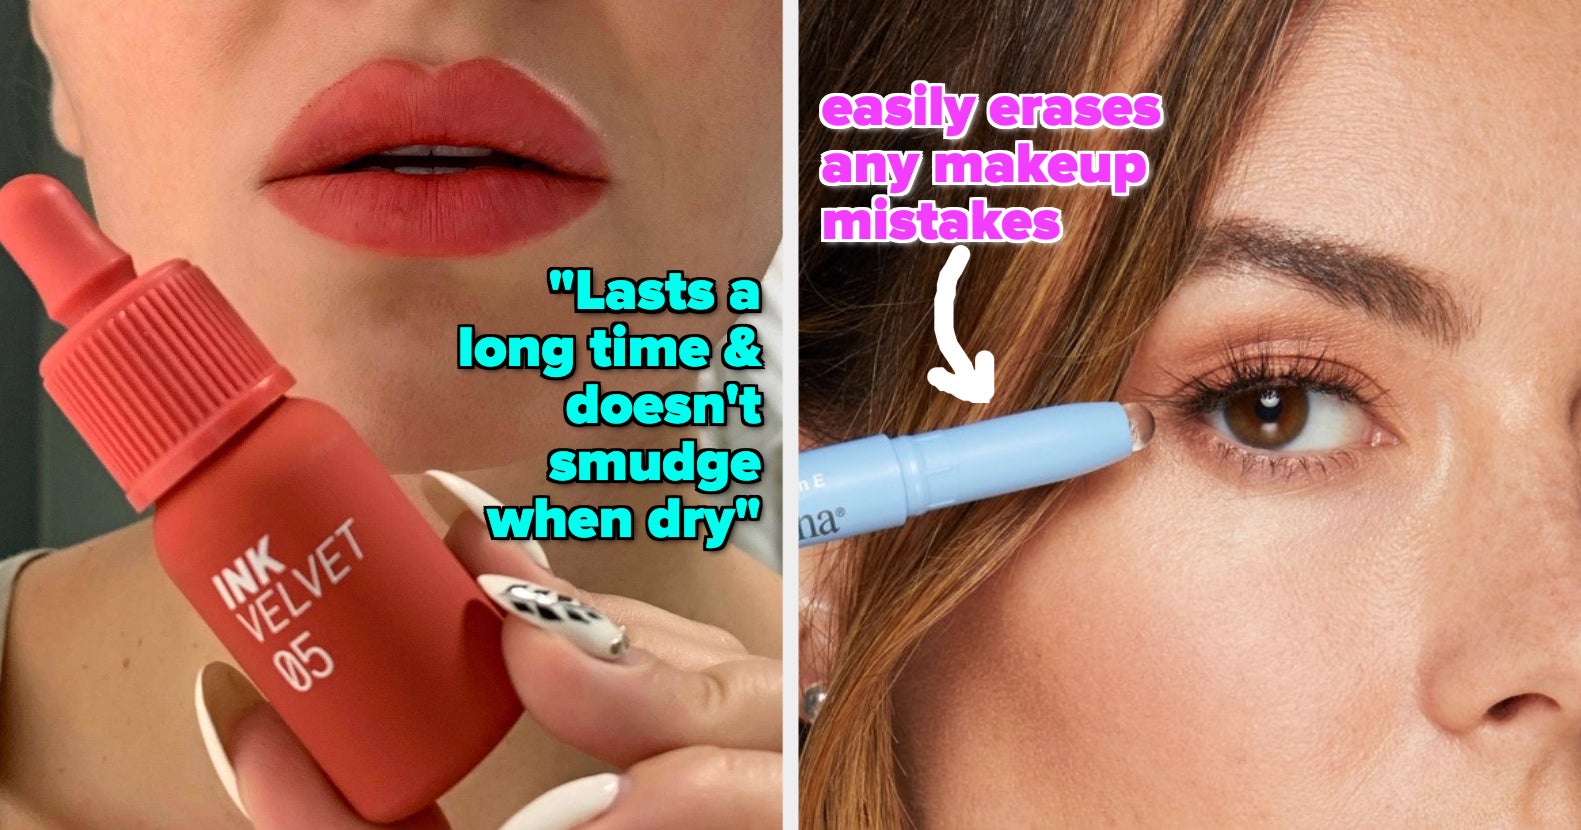  Lipstick for Older Women Water Lipstick Creative Gloss Lip  Long Lipstick Fun Liner Lasting Lip Color Cosmetics Add on Items under 2  Dollars : Beauty & Personal Care